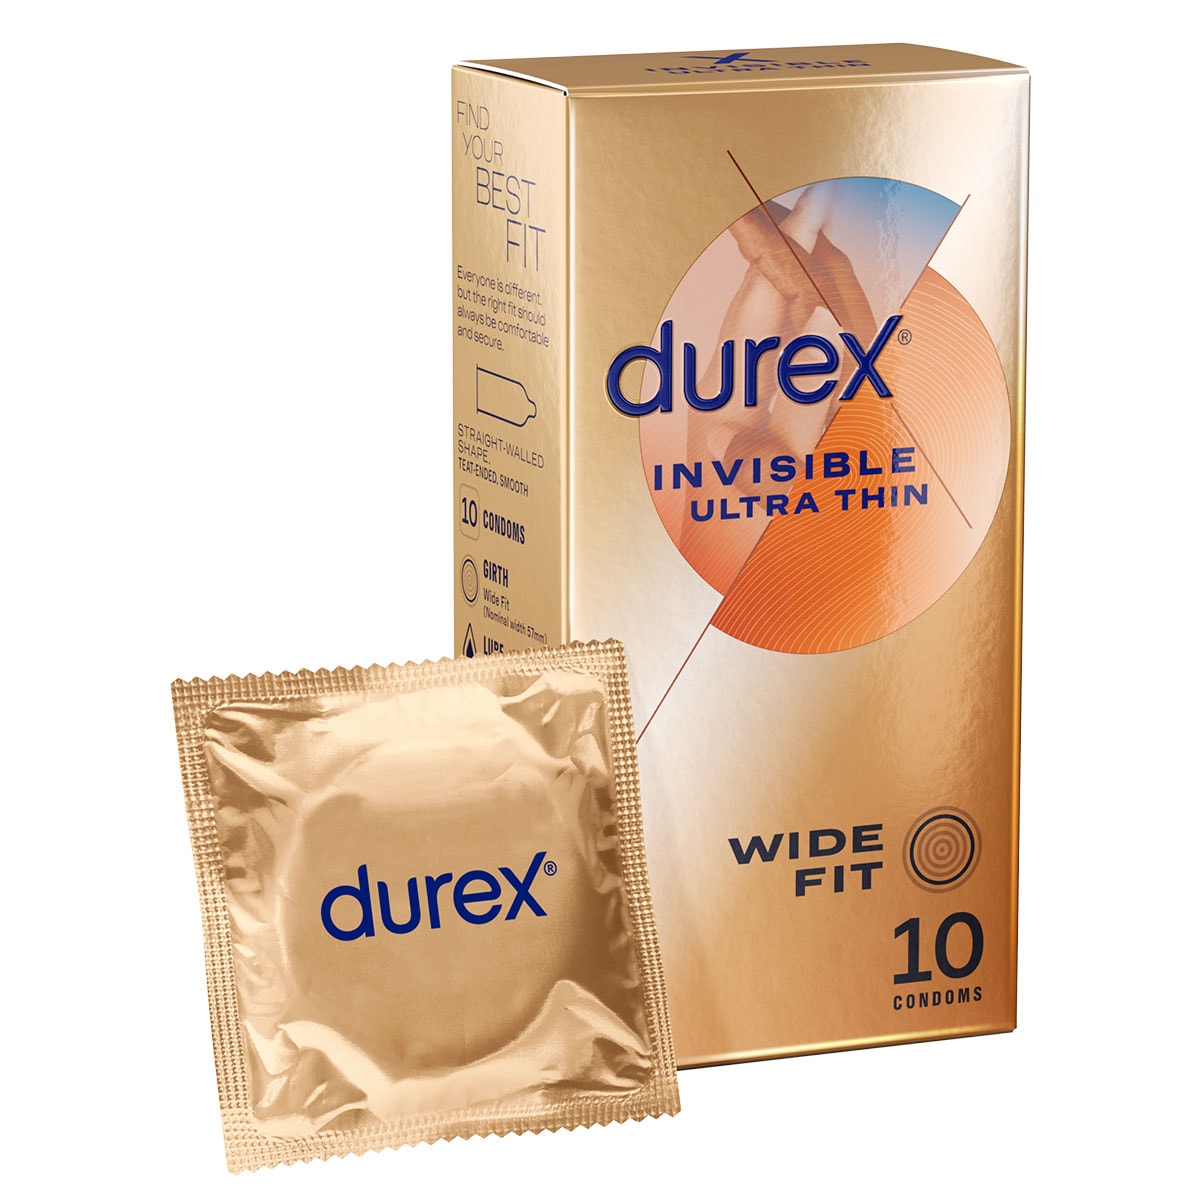 Durex Invisible Ultra Thin Wide Fit Condoms 10 Pack